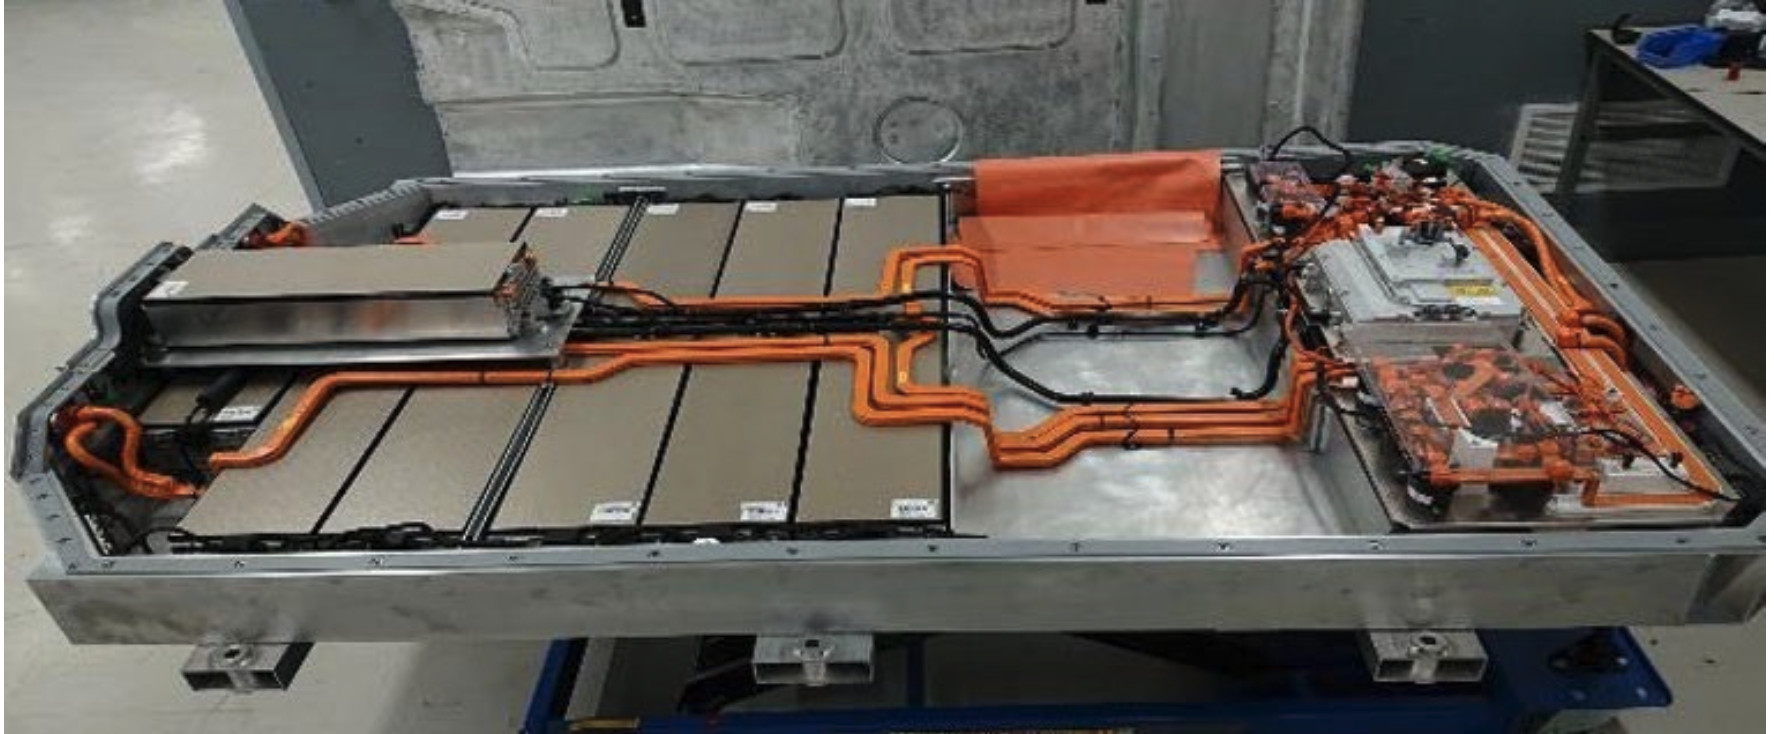 Research could help extend EV battery life by 30%, slow degradationResearch could help extend EV battery life by 30%, slow degradation